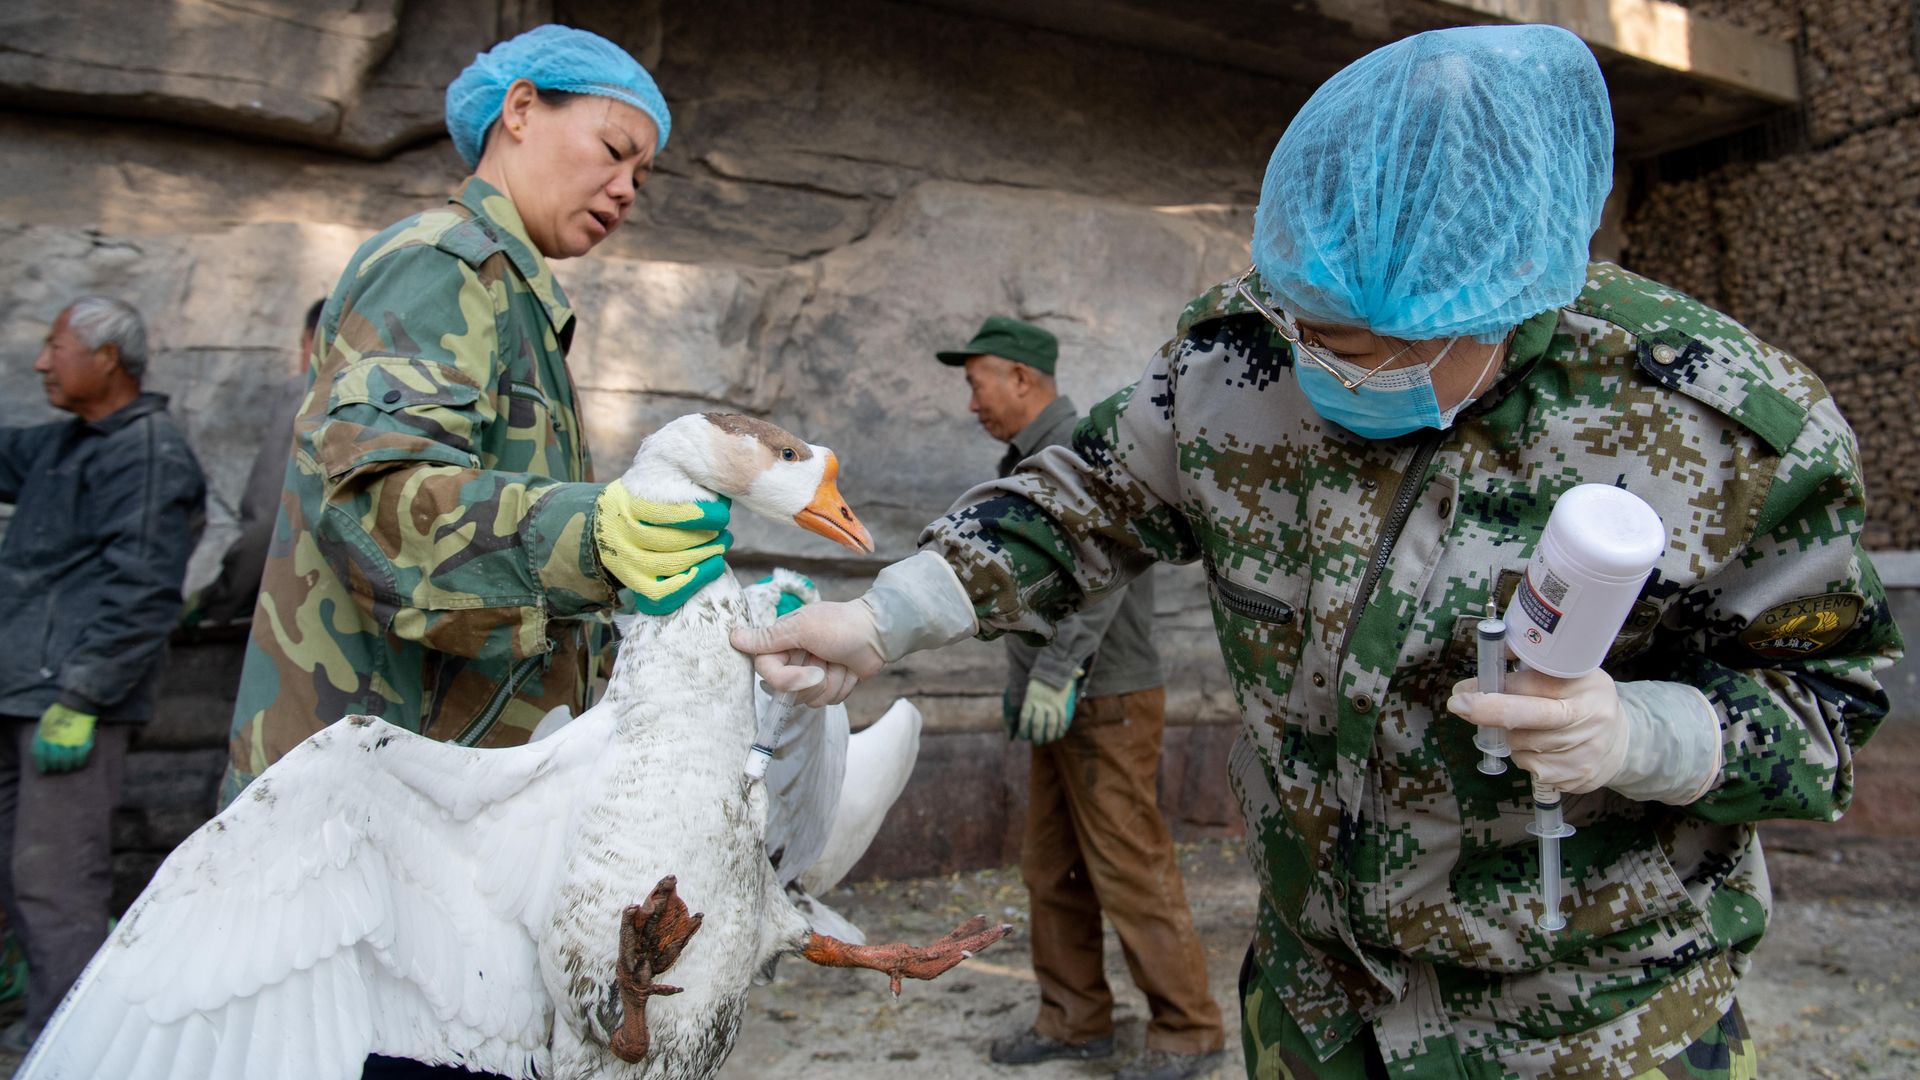  A veterinarian injects avian flu vaccine into a goose at the Taiyuan Zoo on November 10, 2020 in Taiyuan, Shanxi Province of China